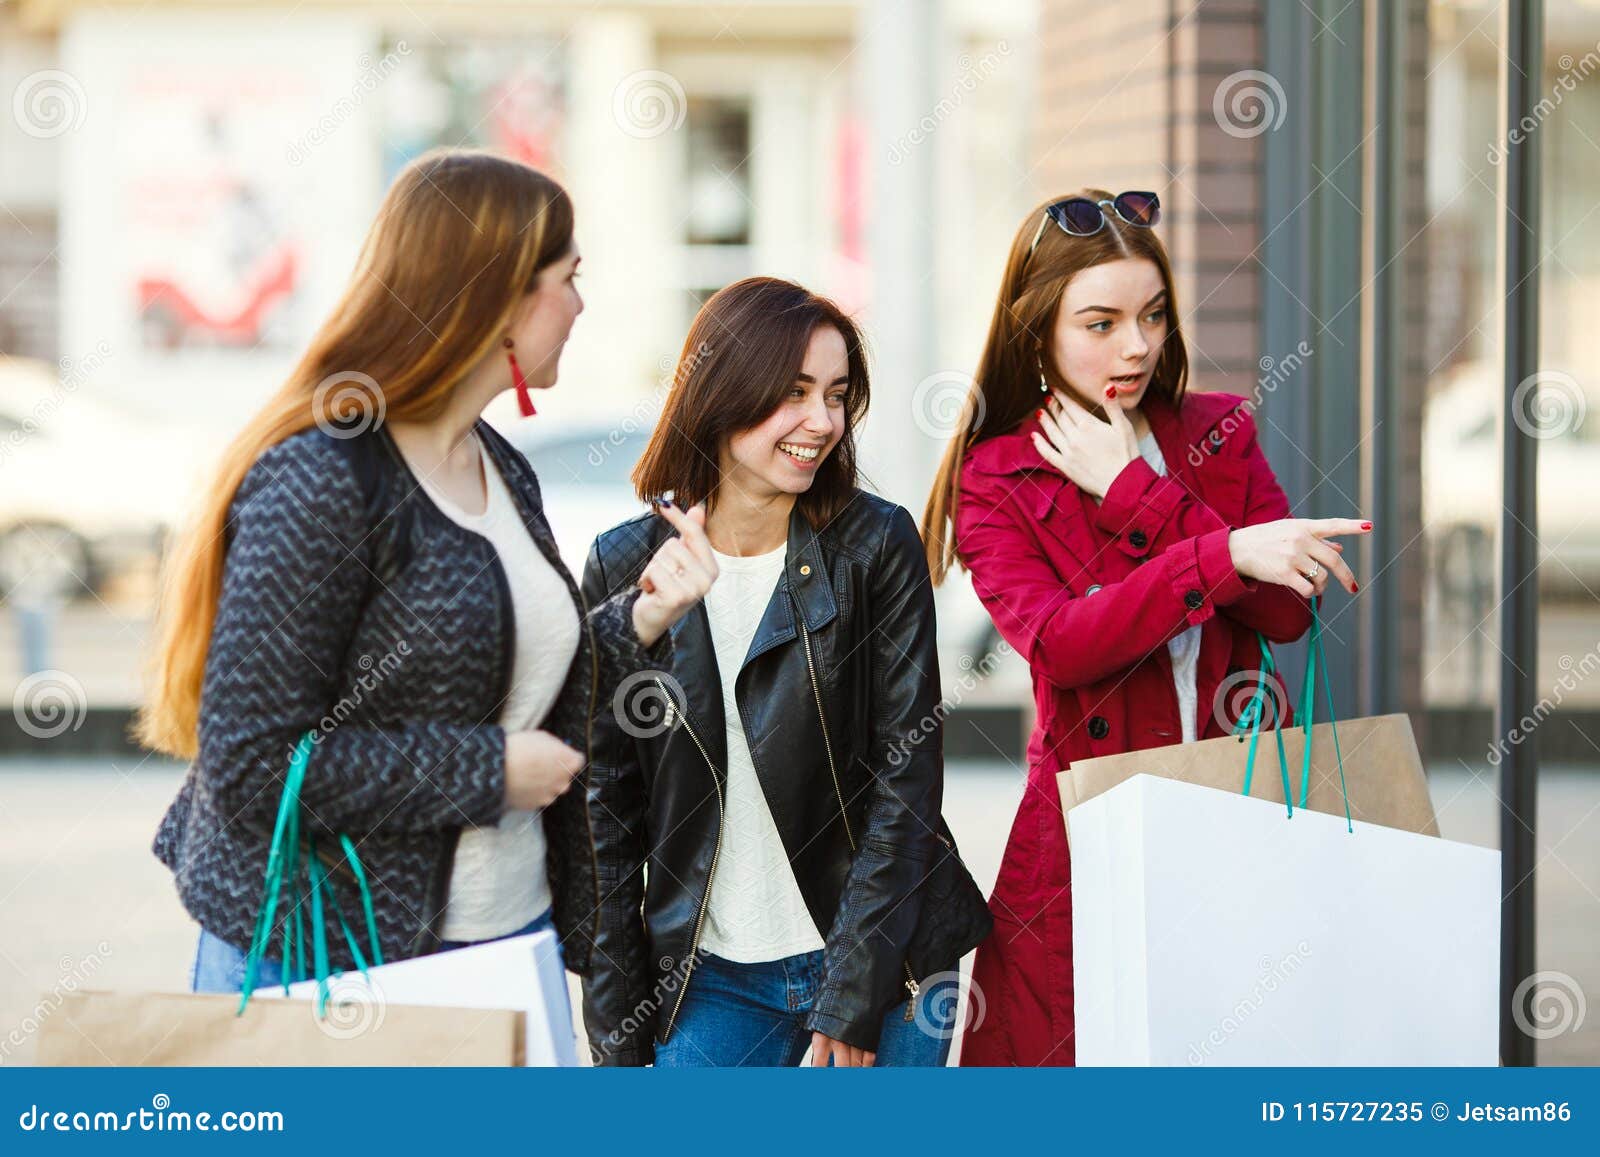 Woman With Shopping Bags Pointing At Shop Window Stock Image - Image of ...